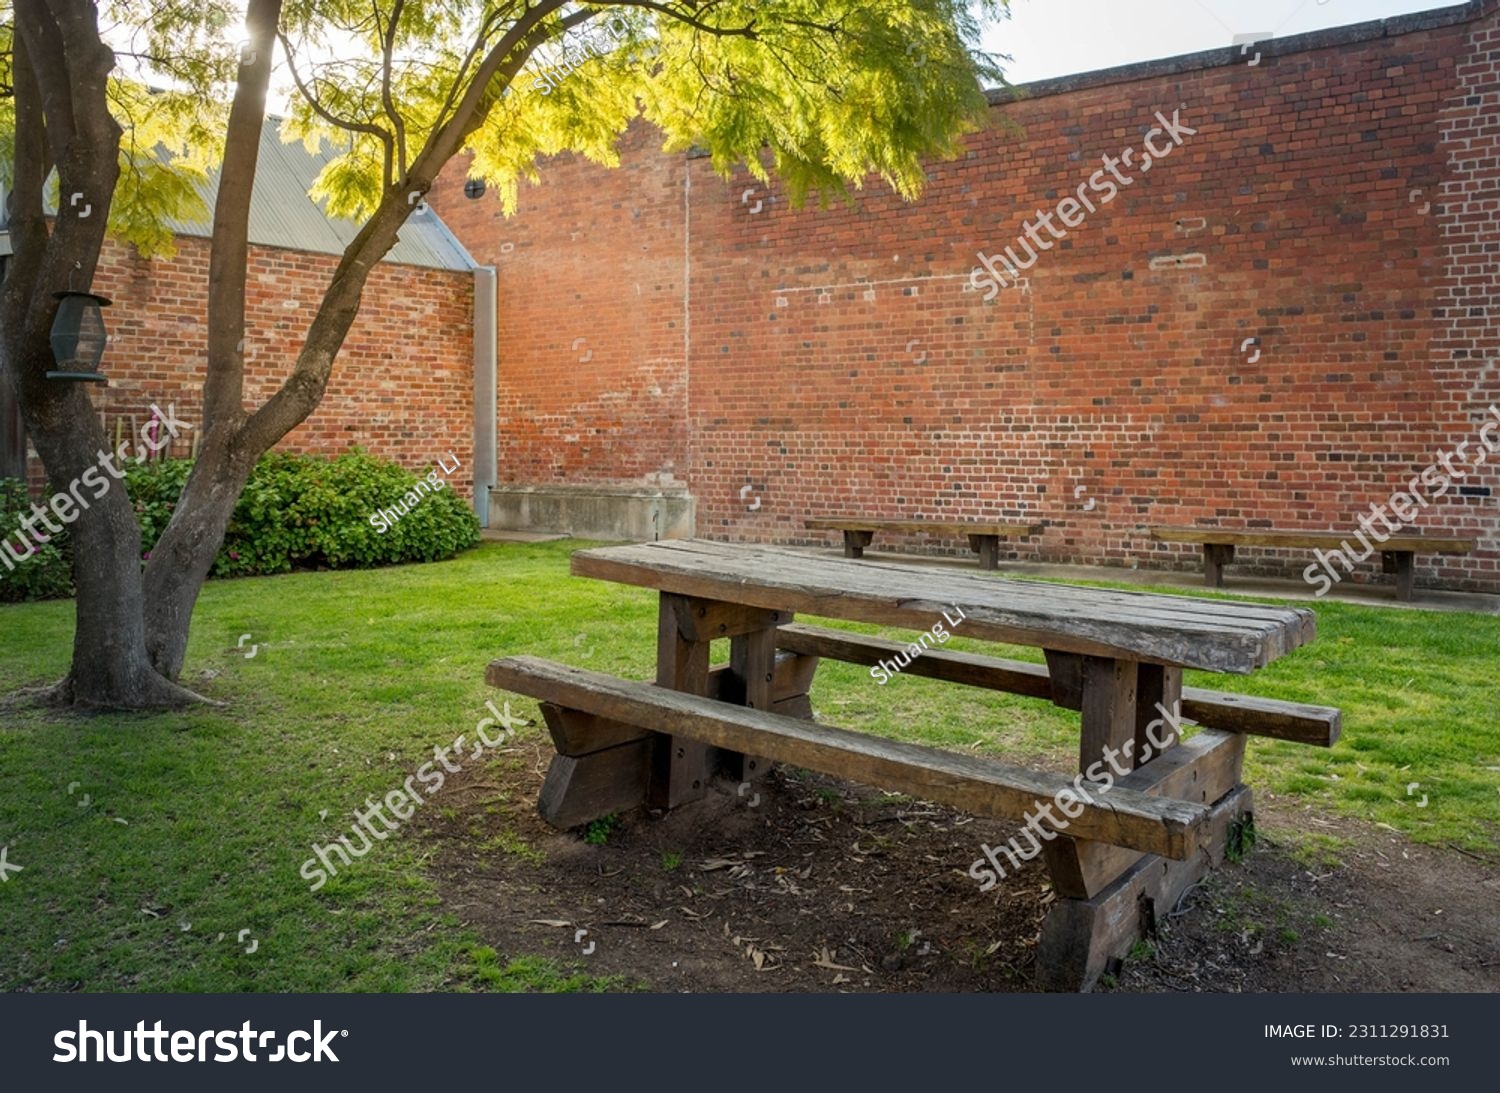 An old and weathered wooden picnic bench and table under a tree in a courtyard with classic red brick walls in warm natural sunlight. #2311291831